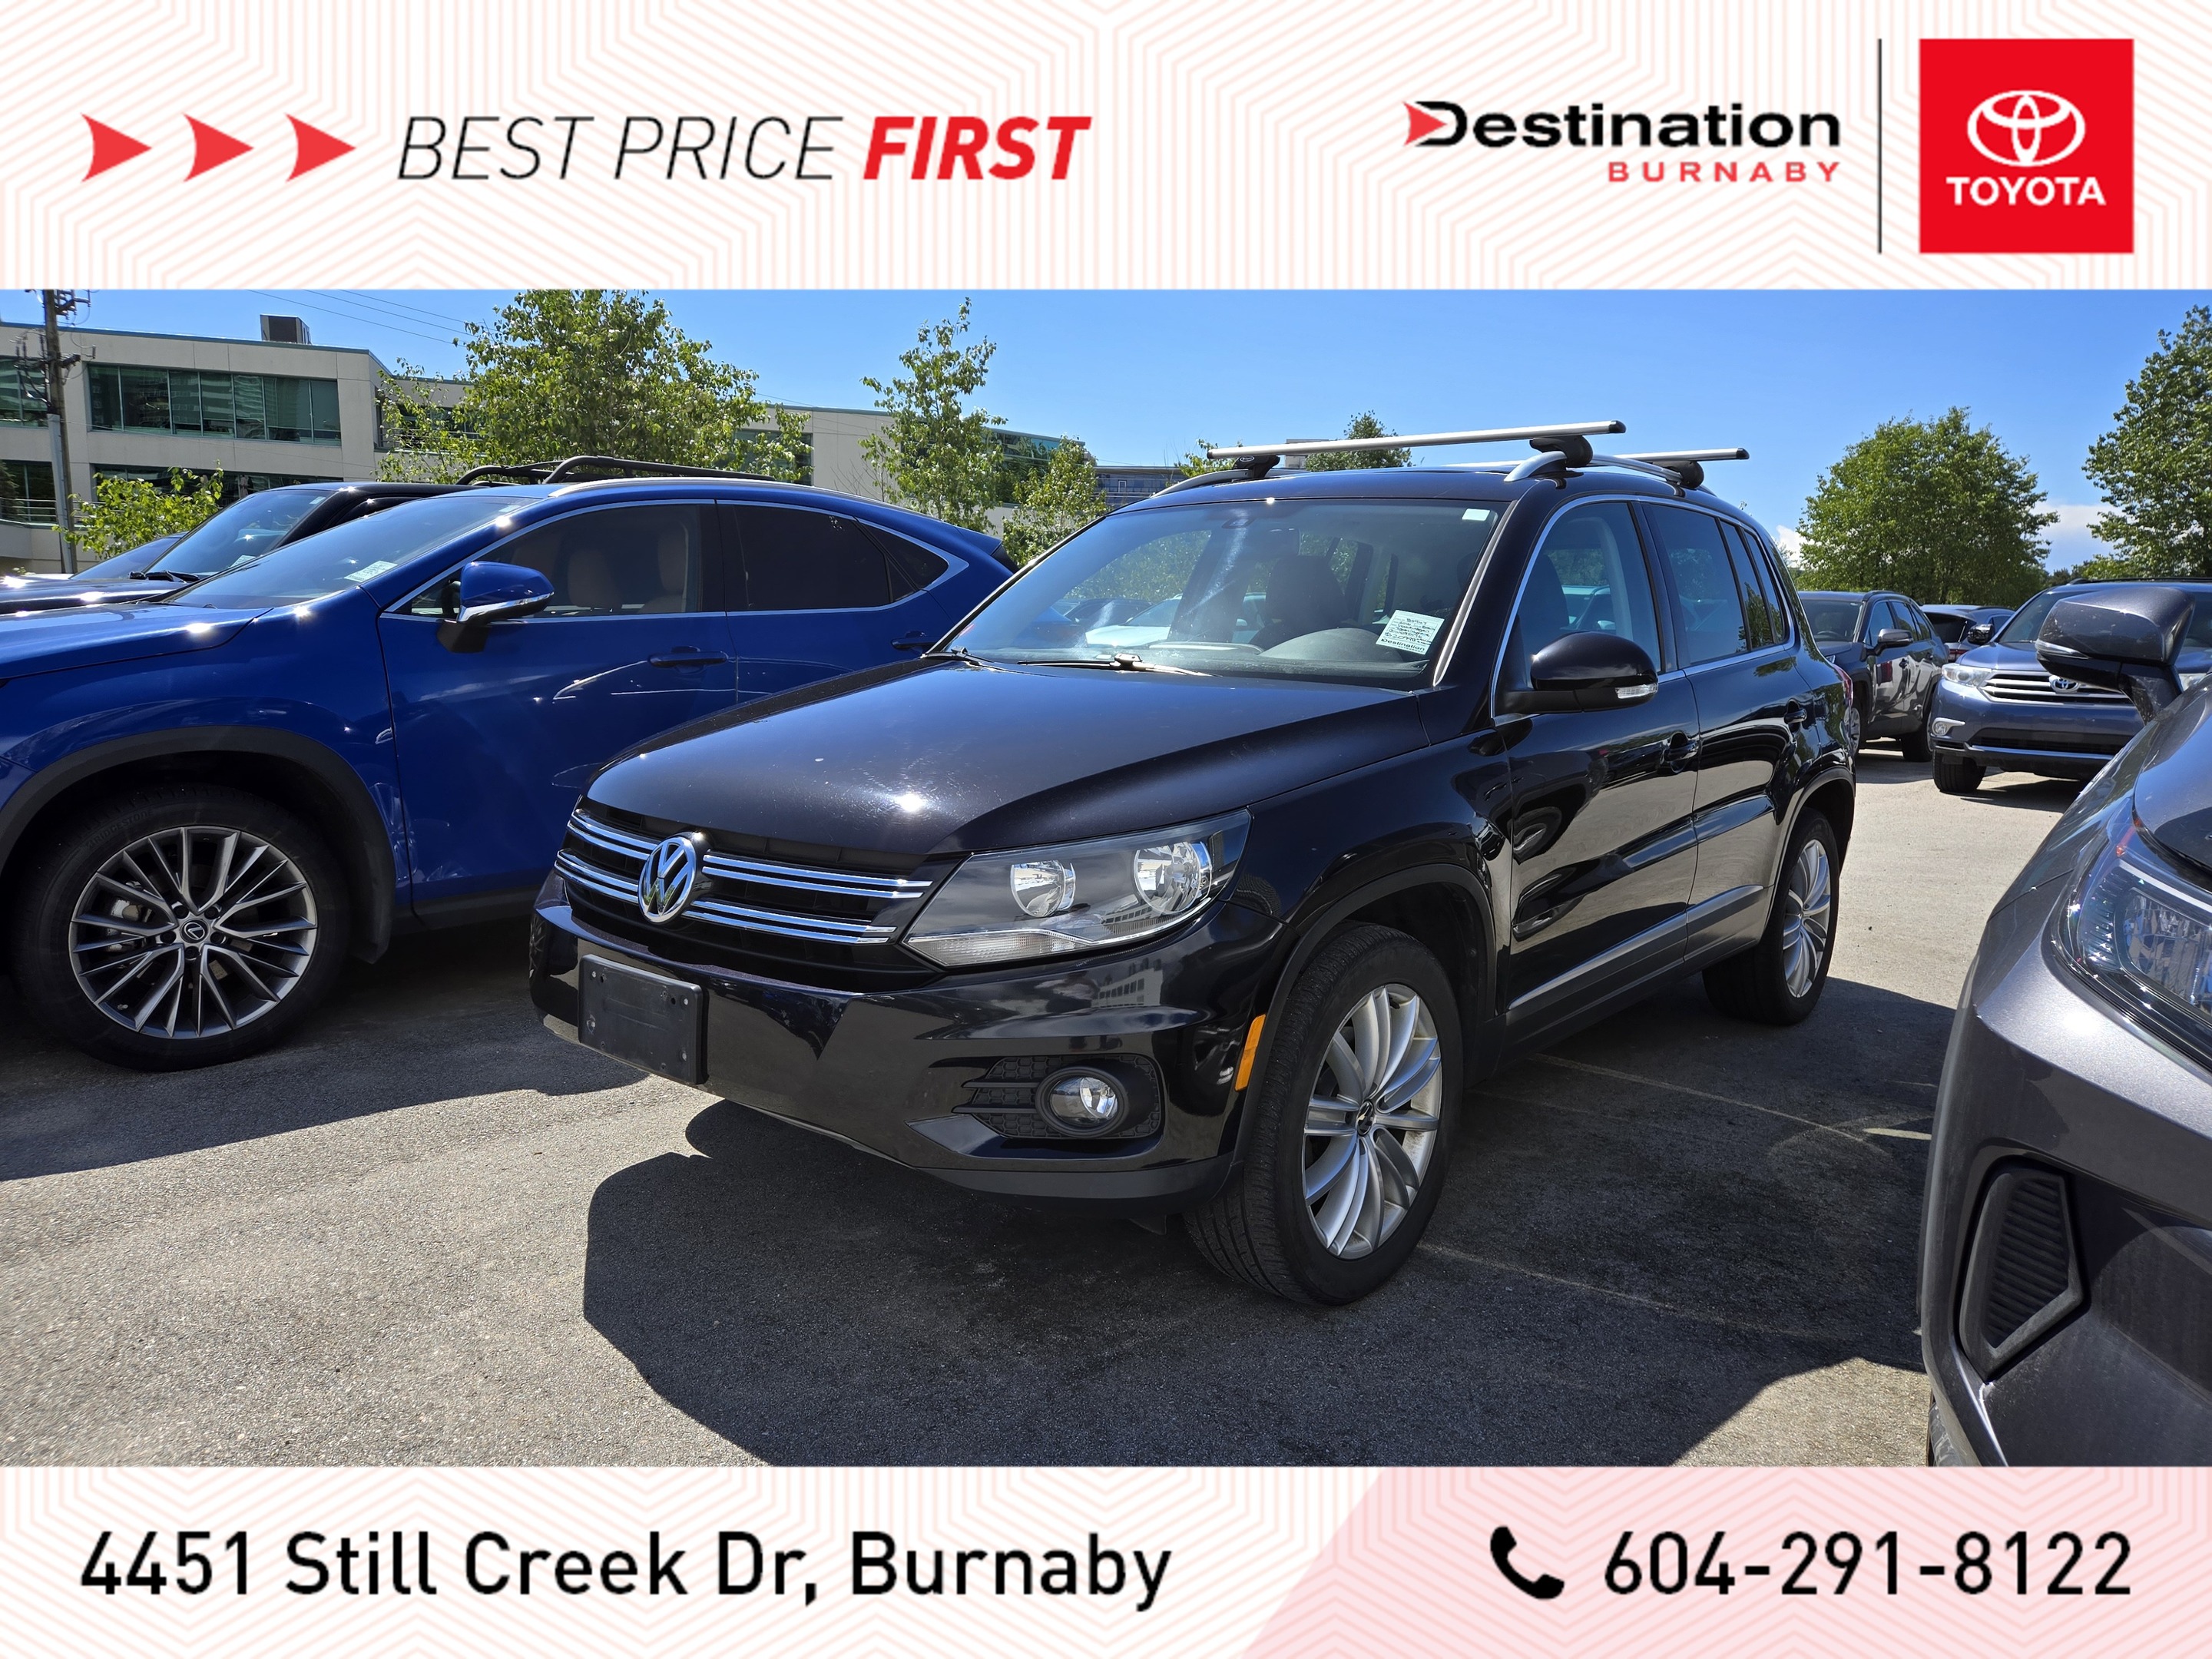 2016 Volkswagen Tiguan Highline 4M - Local, No Accidents, Fully Loaded!